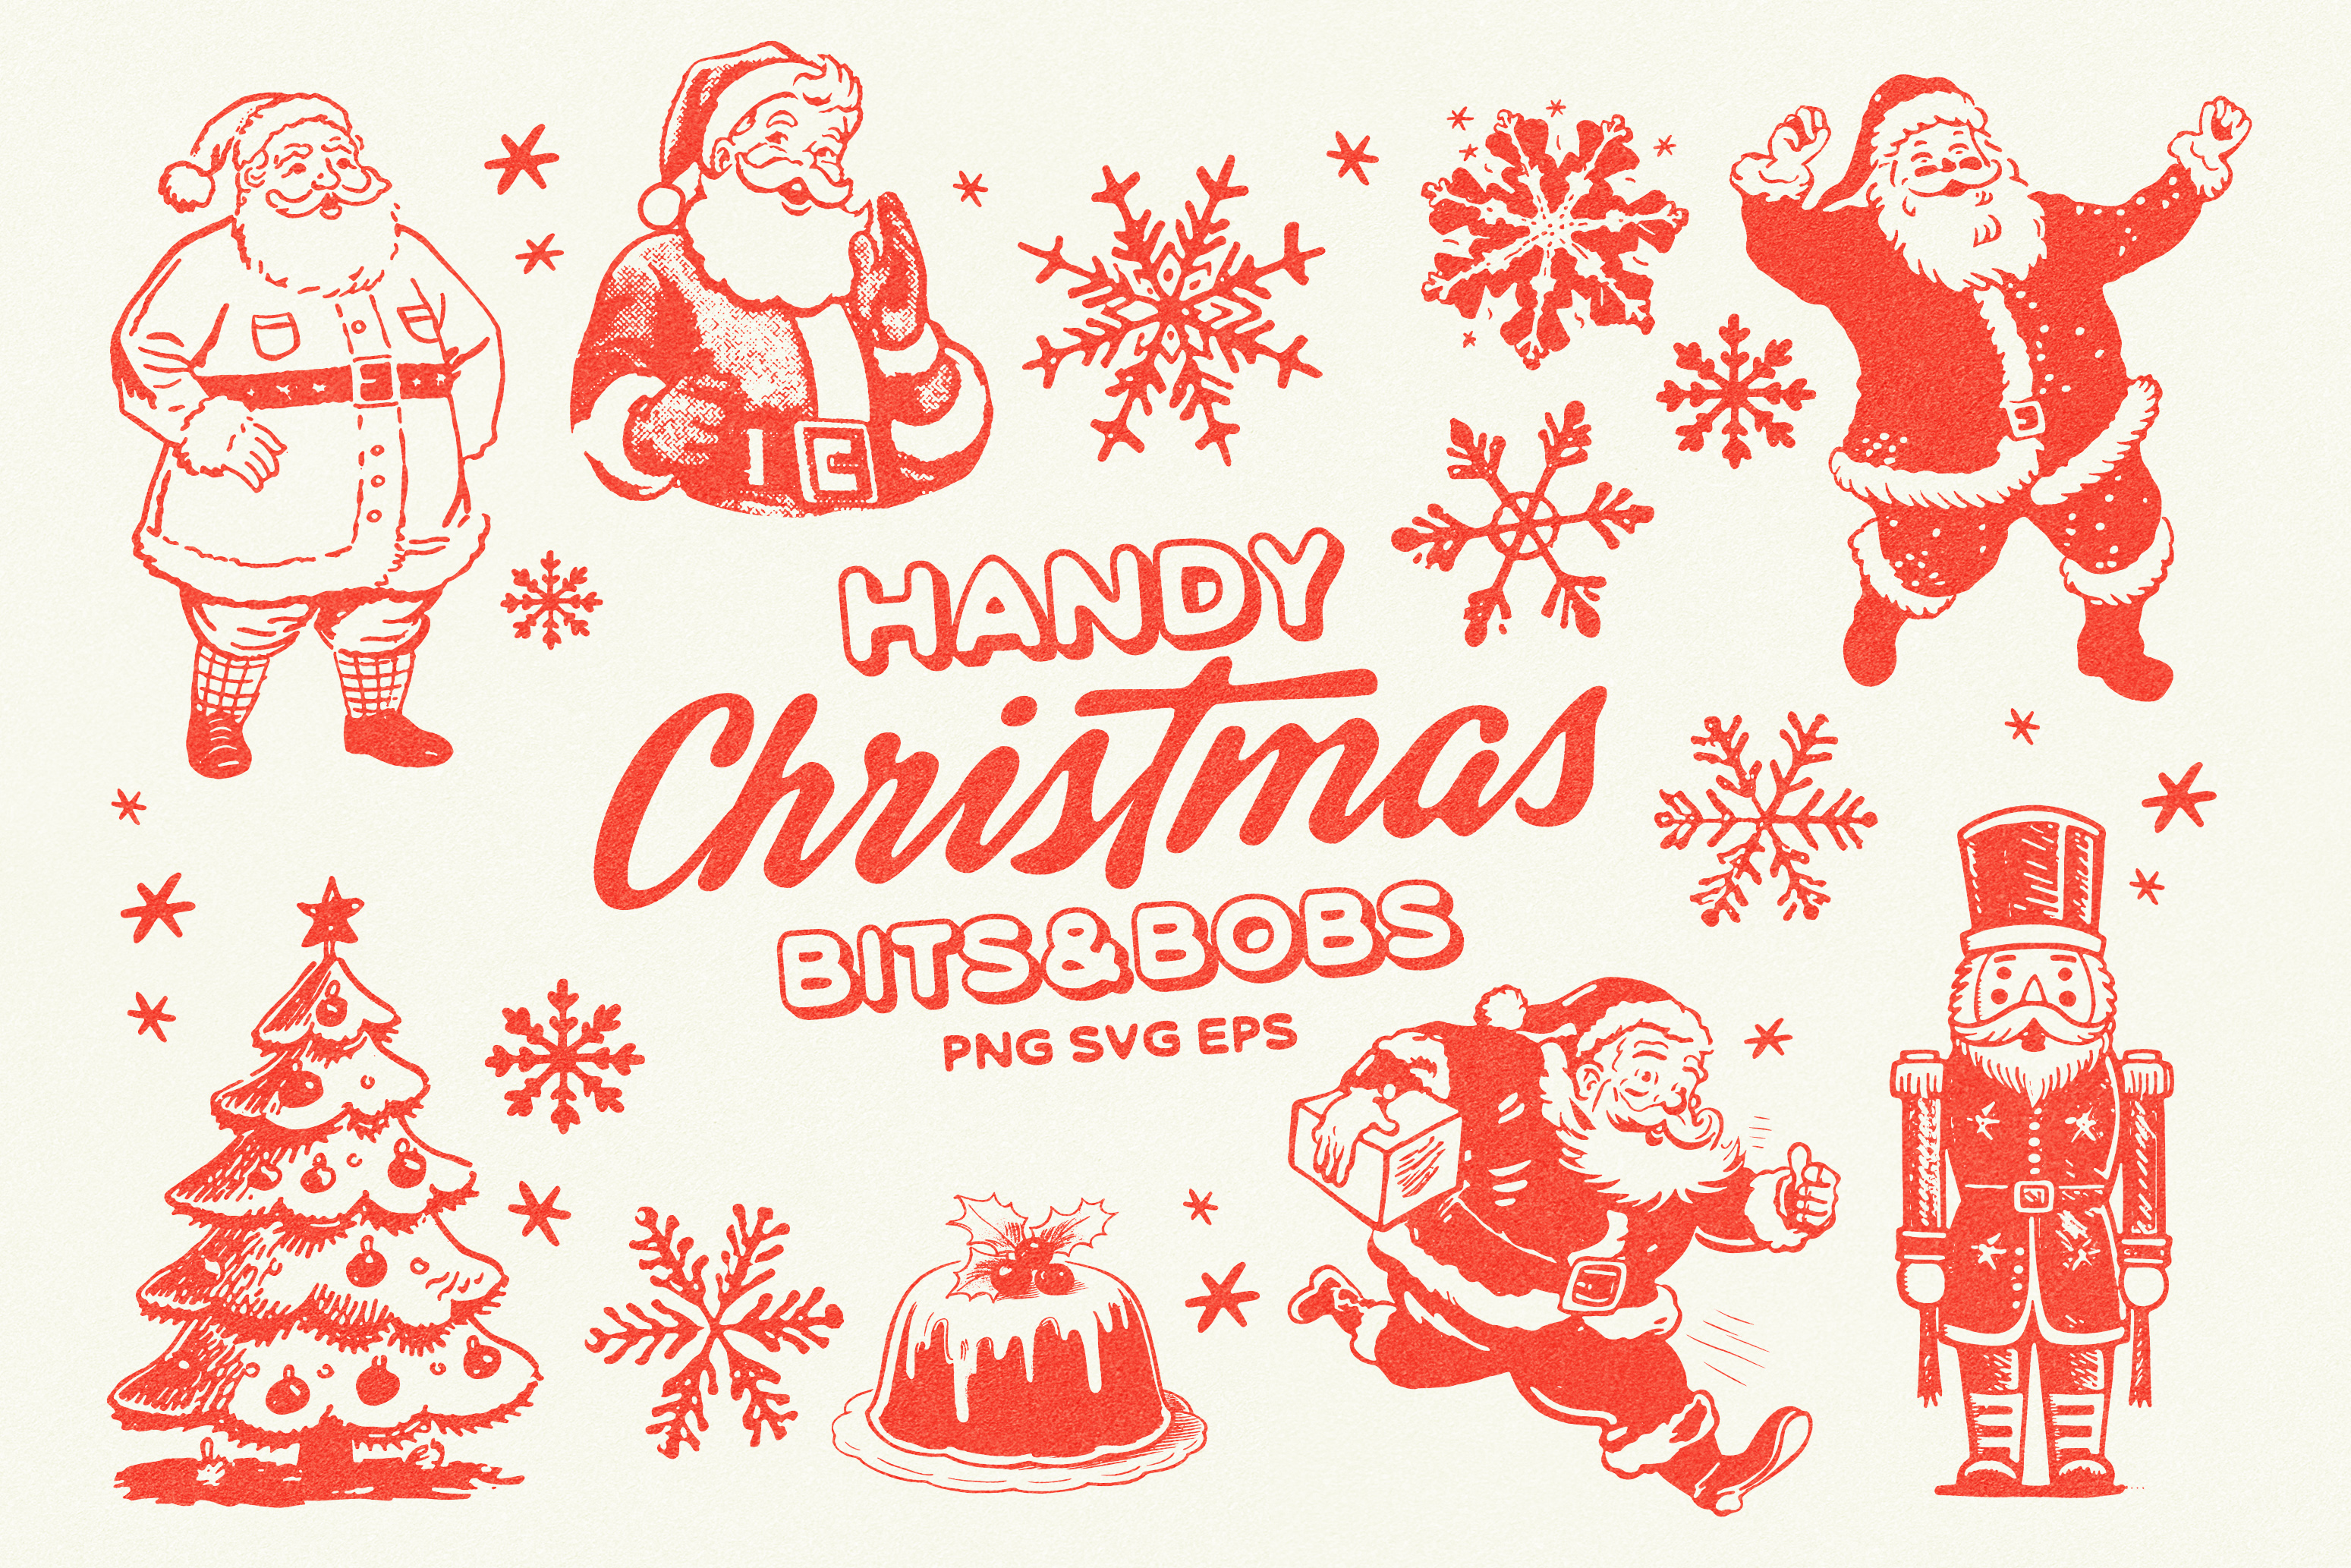 Handy Christmas Bits and Bobs (Illustrations) by Nicky Laatz